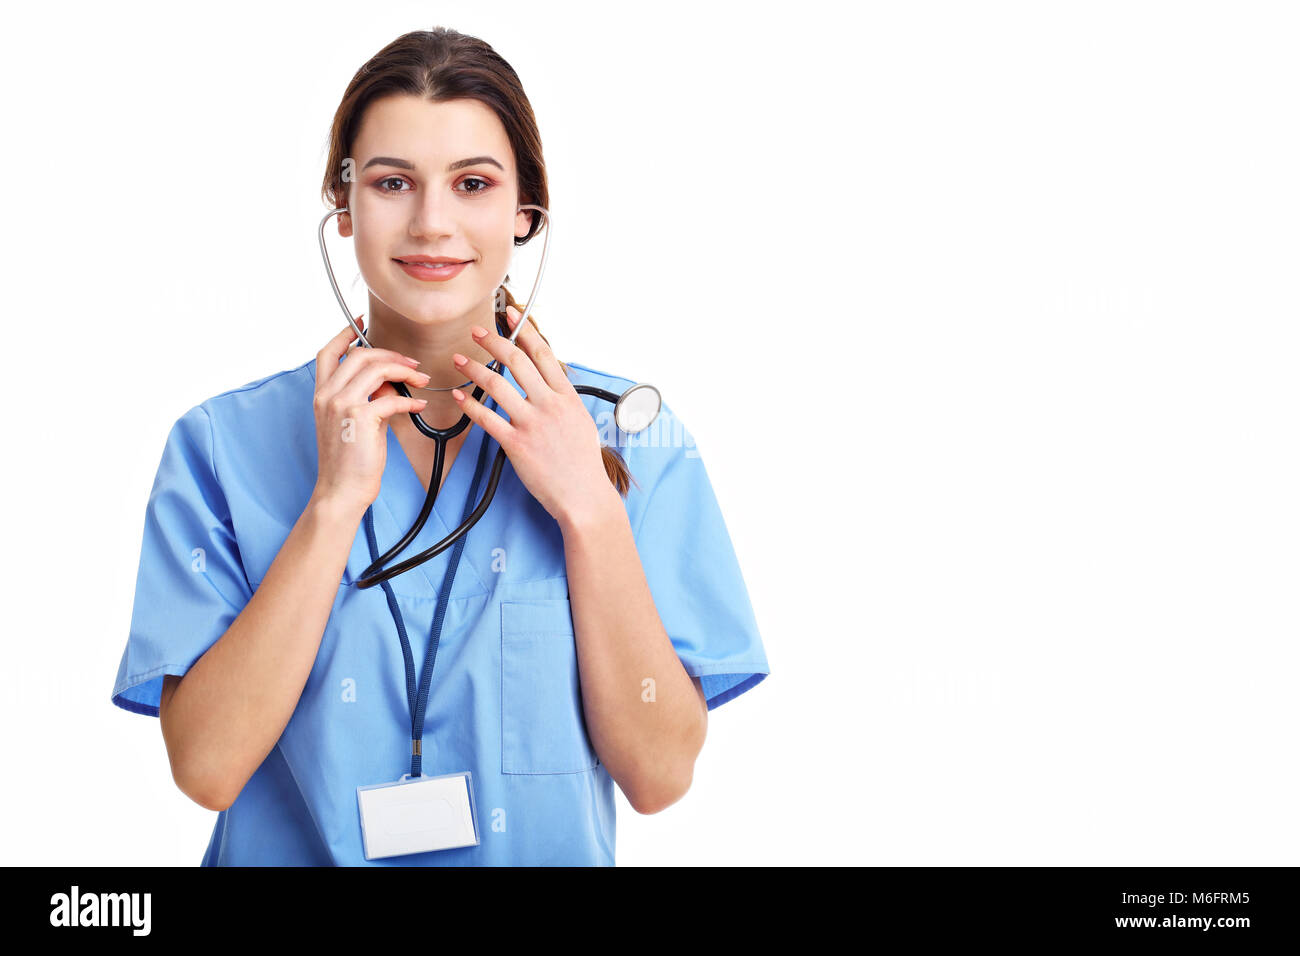 Woman doctor isolated over white background Stock Photo